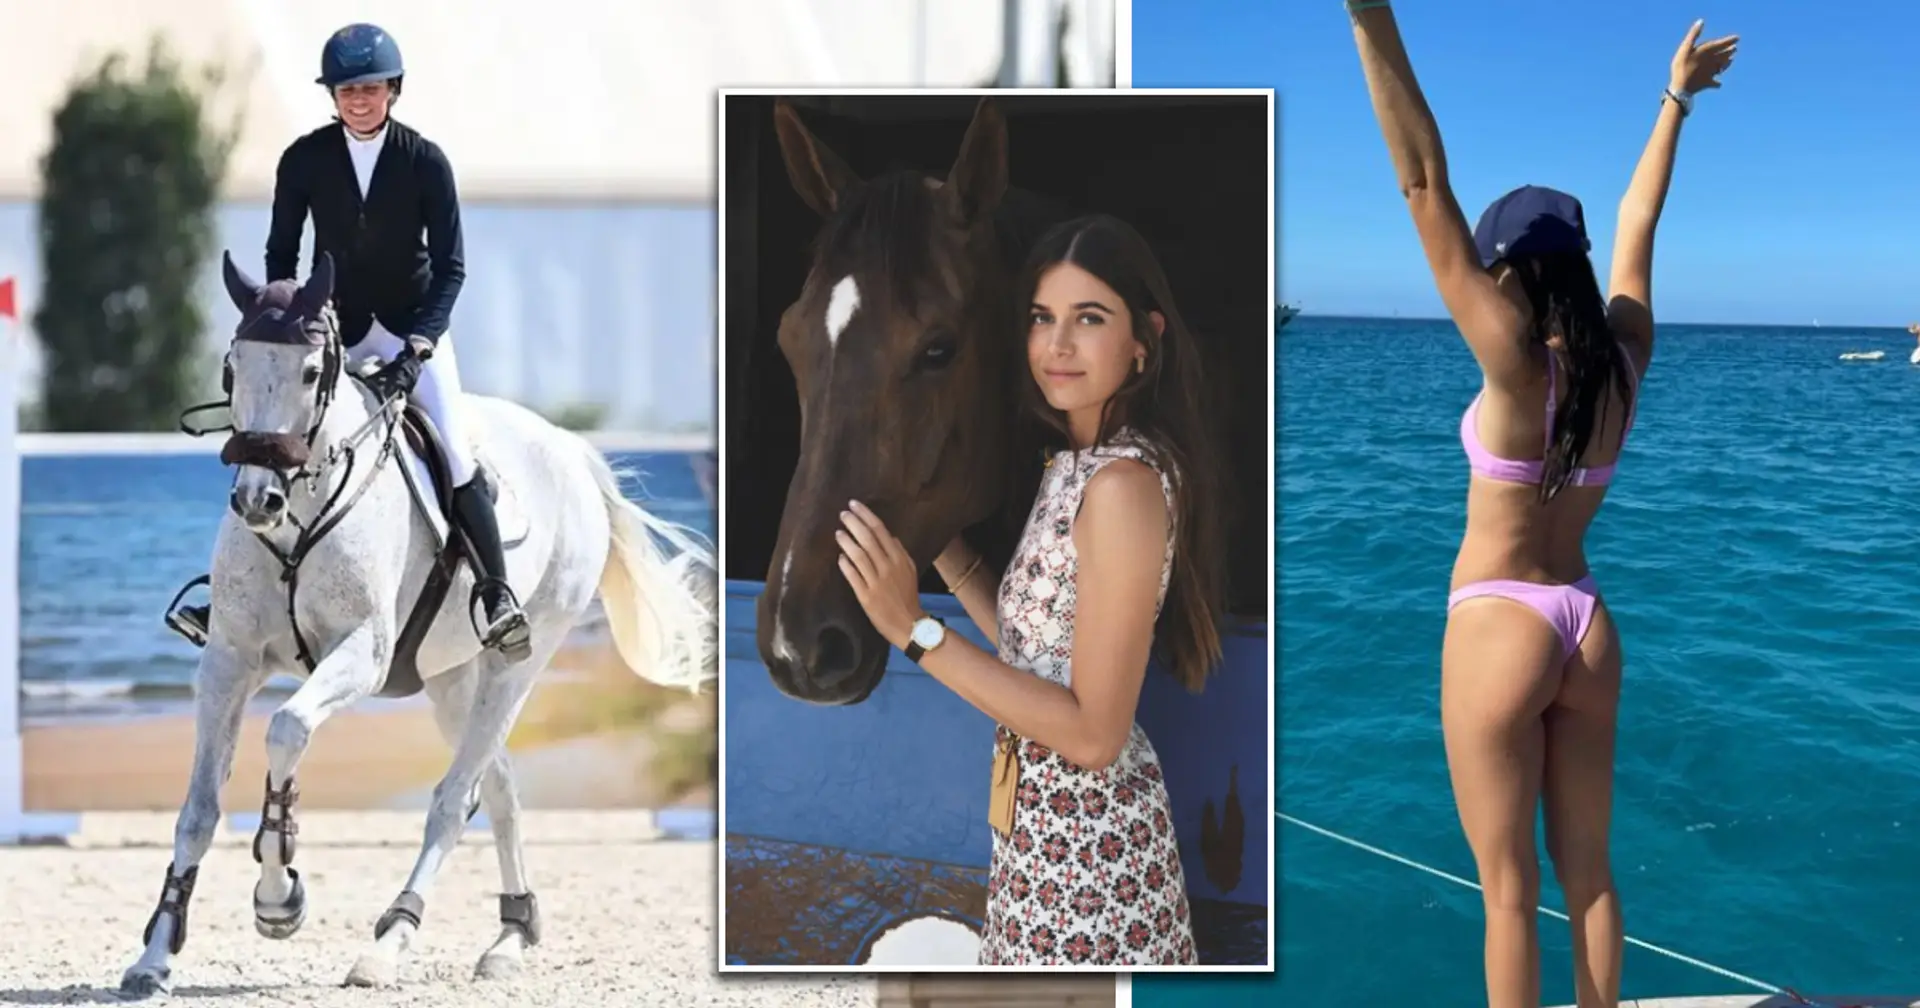 Luis Enrique's stunning daughter is pursuing a career in equestrian sports  